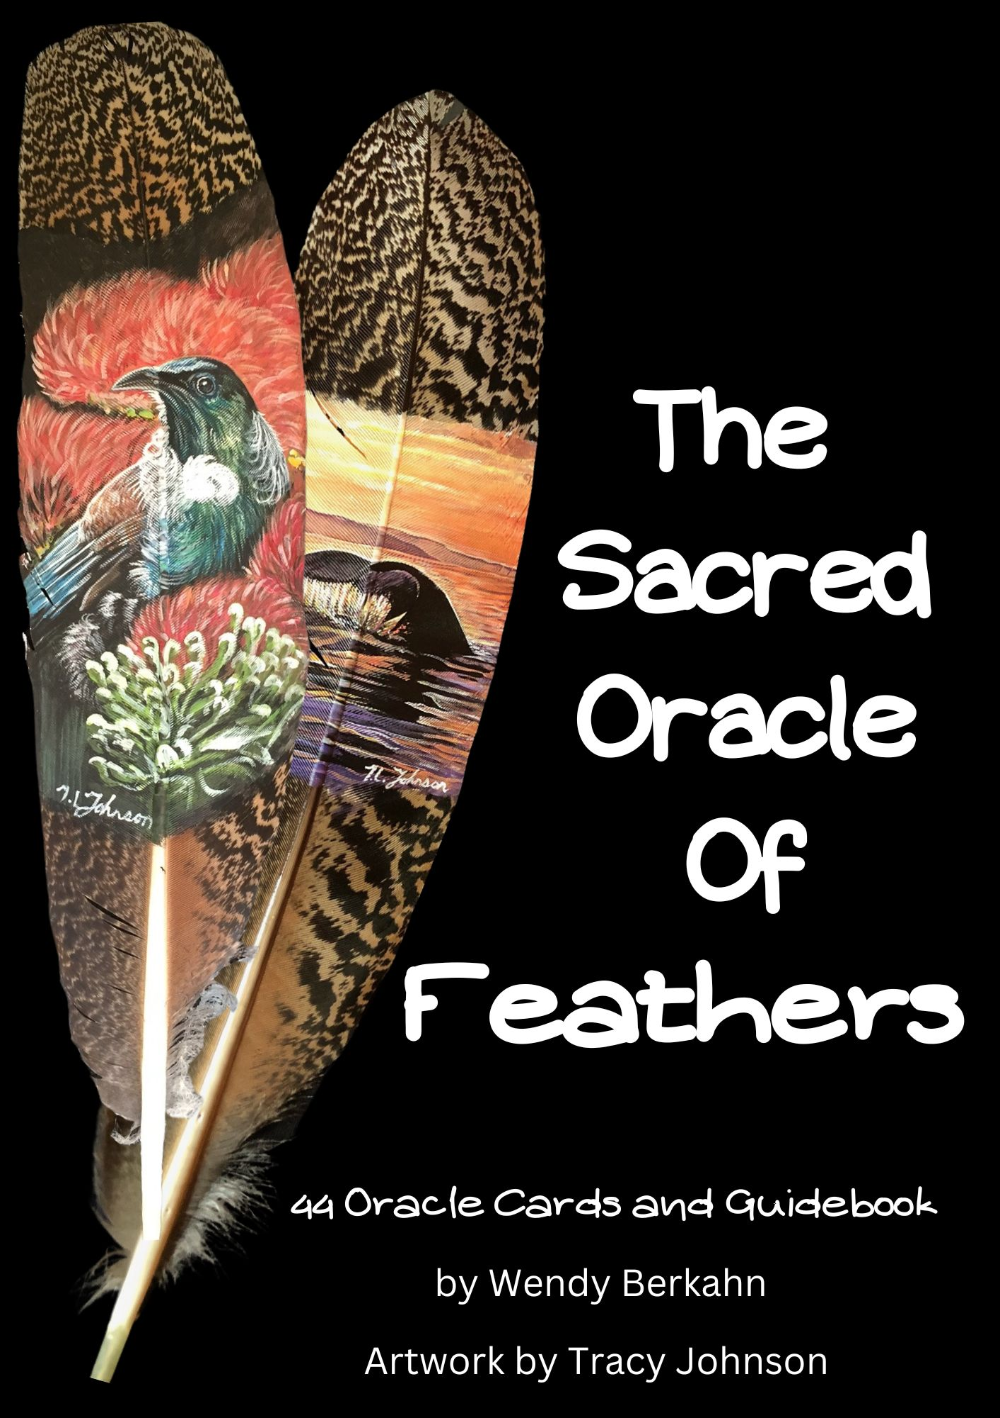 The sacred oracle of feathers-436